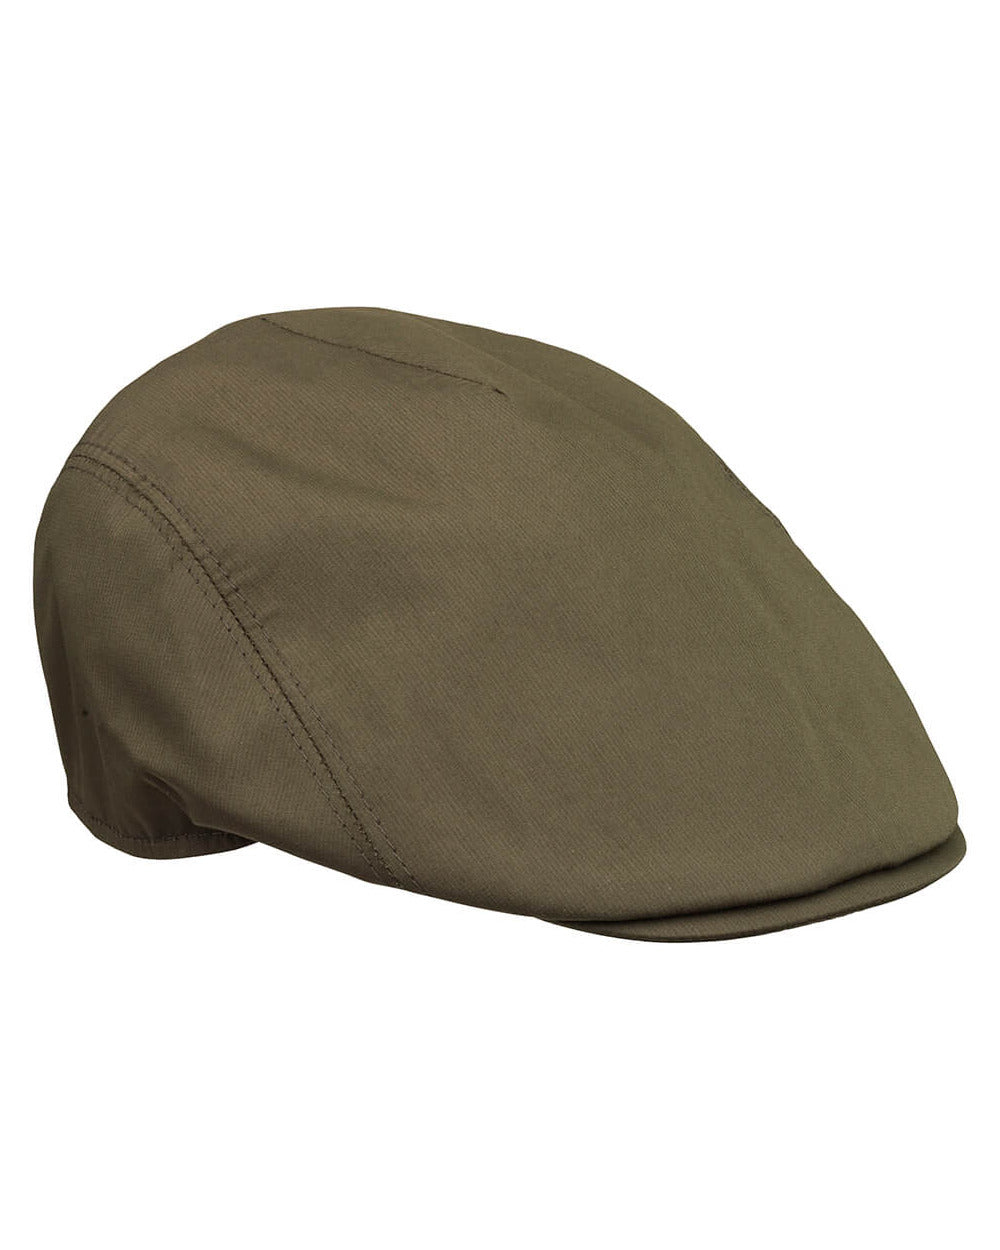 Olive Coloured Laksen Marsh Moffat Cap With CTX On A White Background